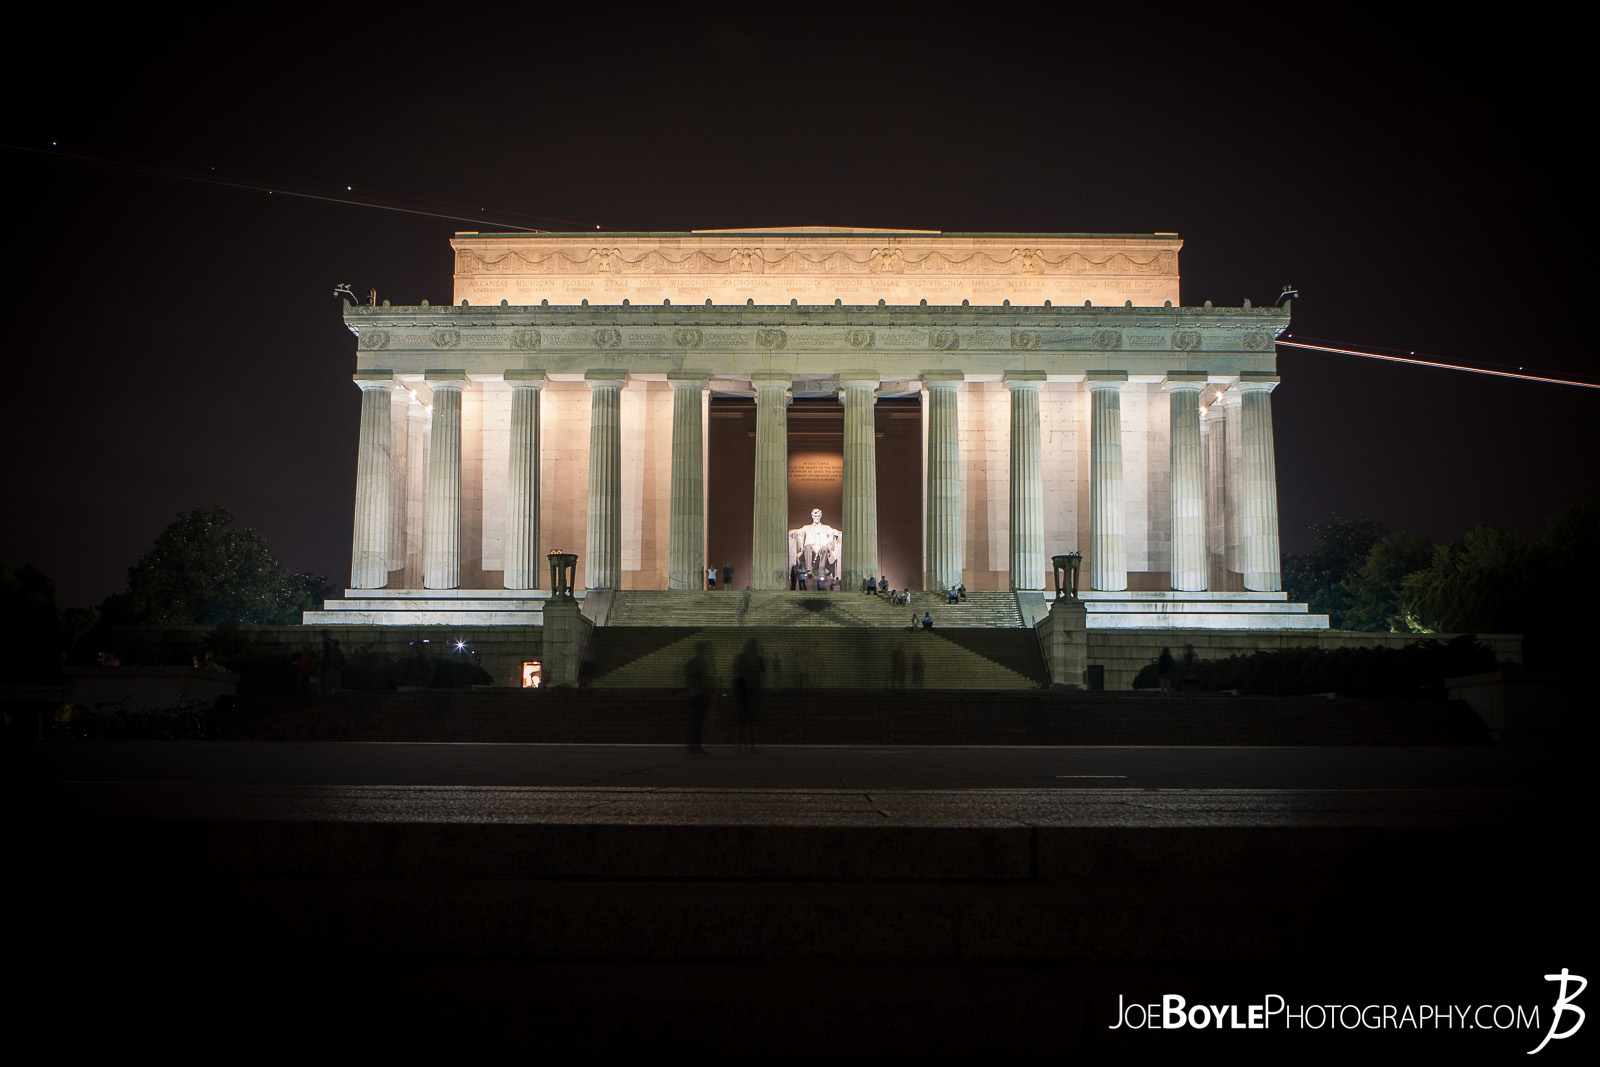  While I was in Washington, DC I was able to take some great night images of a few of the iconic landmarks that make up this city! Here is an image of the Lincoln Memorial! I was able to capture it as a plane was flying behind it! 